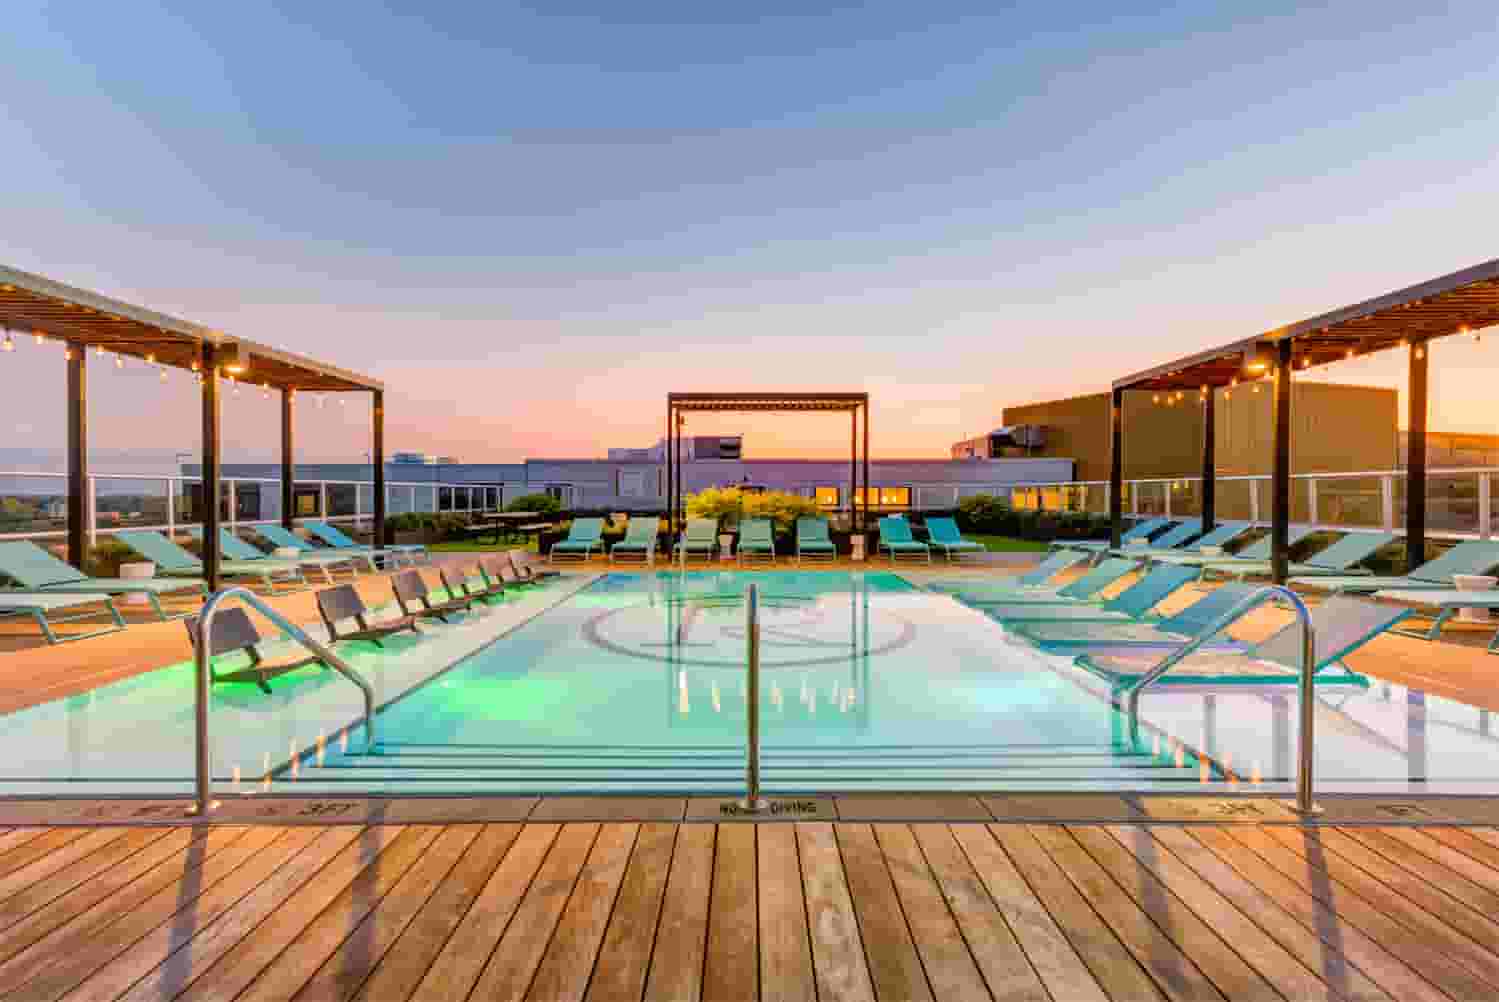 Rise on Chanucey Rooftop Pool